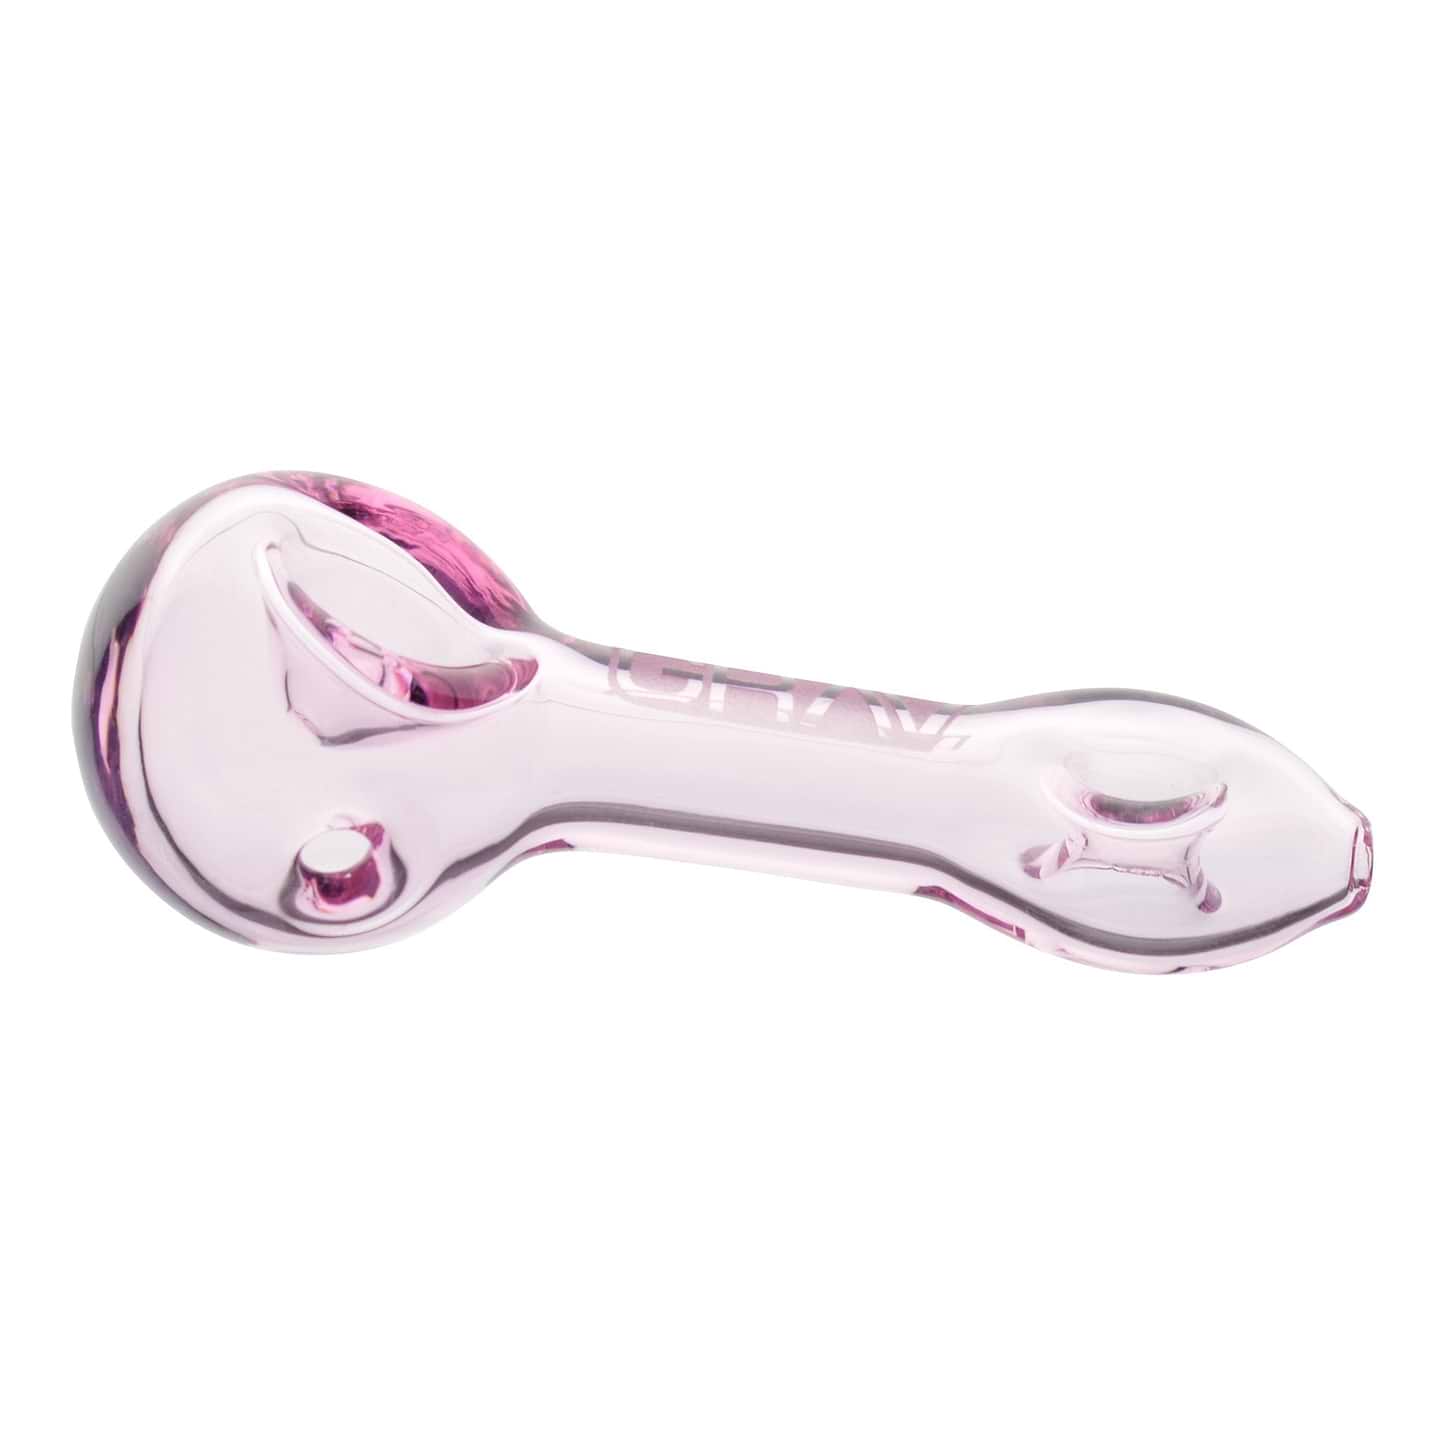 Elegant 3-inch pink cute spoon-shaped GRAV pipe smoking device with clear pink glass